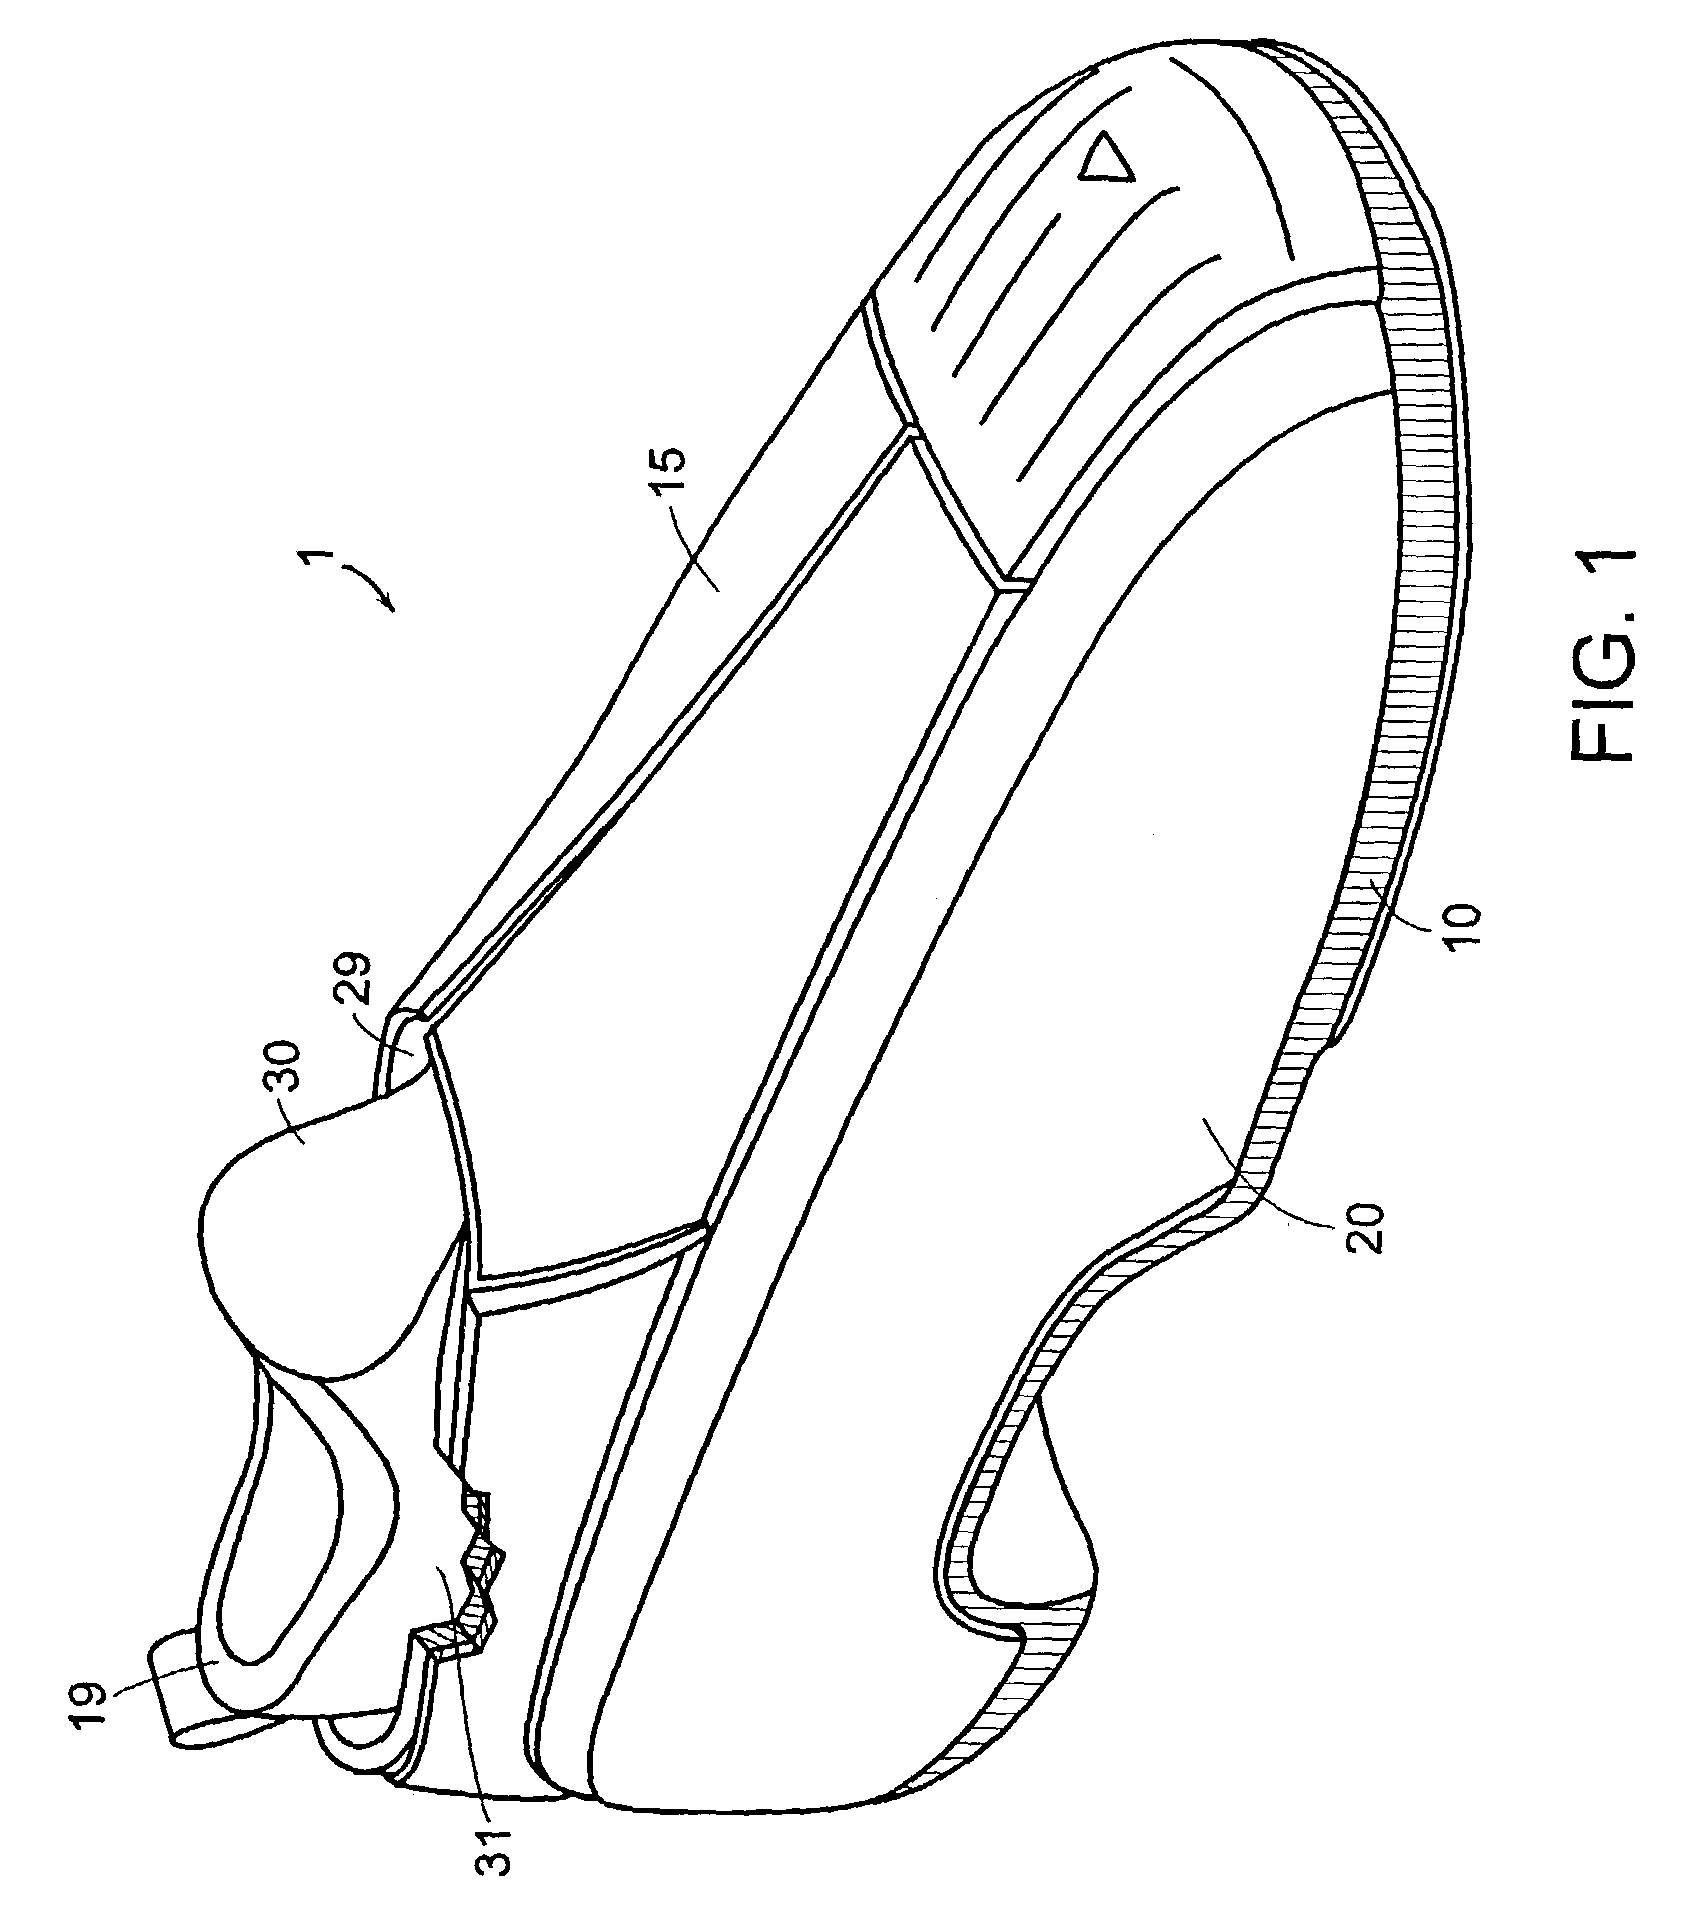 Shoe upper and methods of manufacture